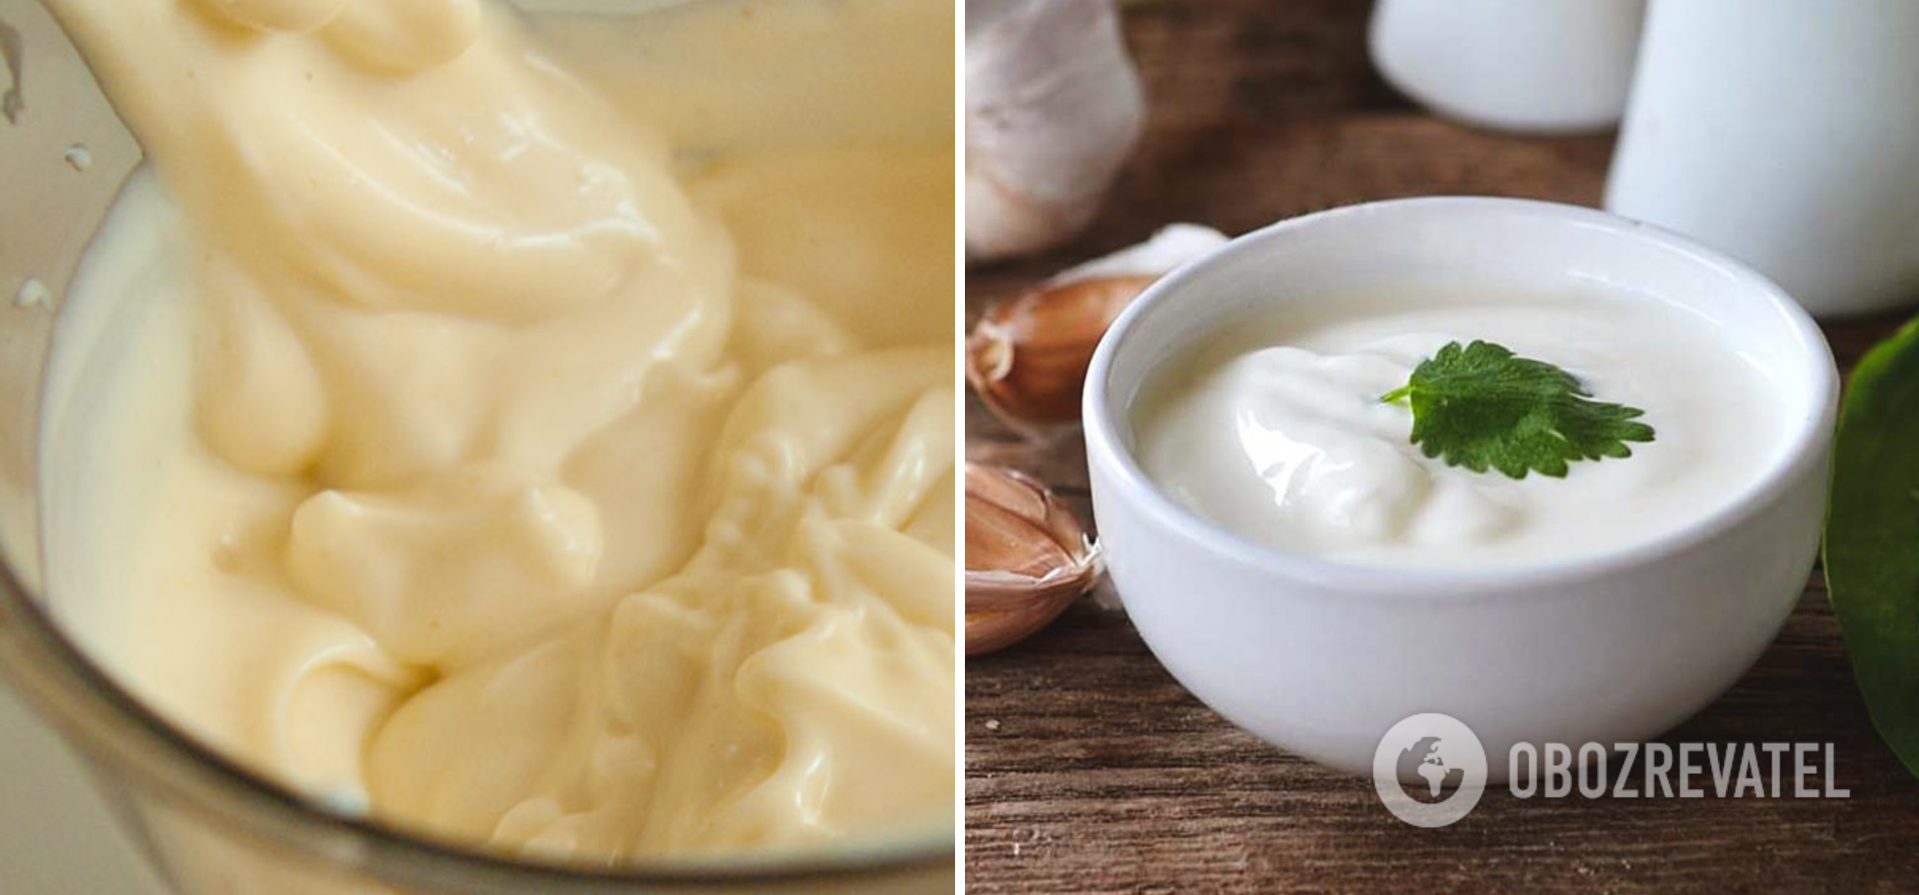 How to make mayonnaise properly